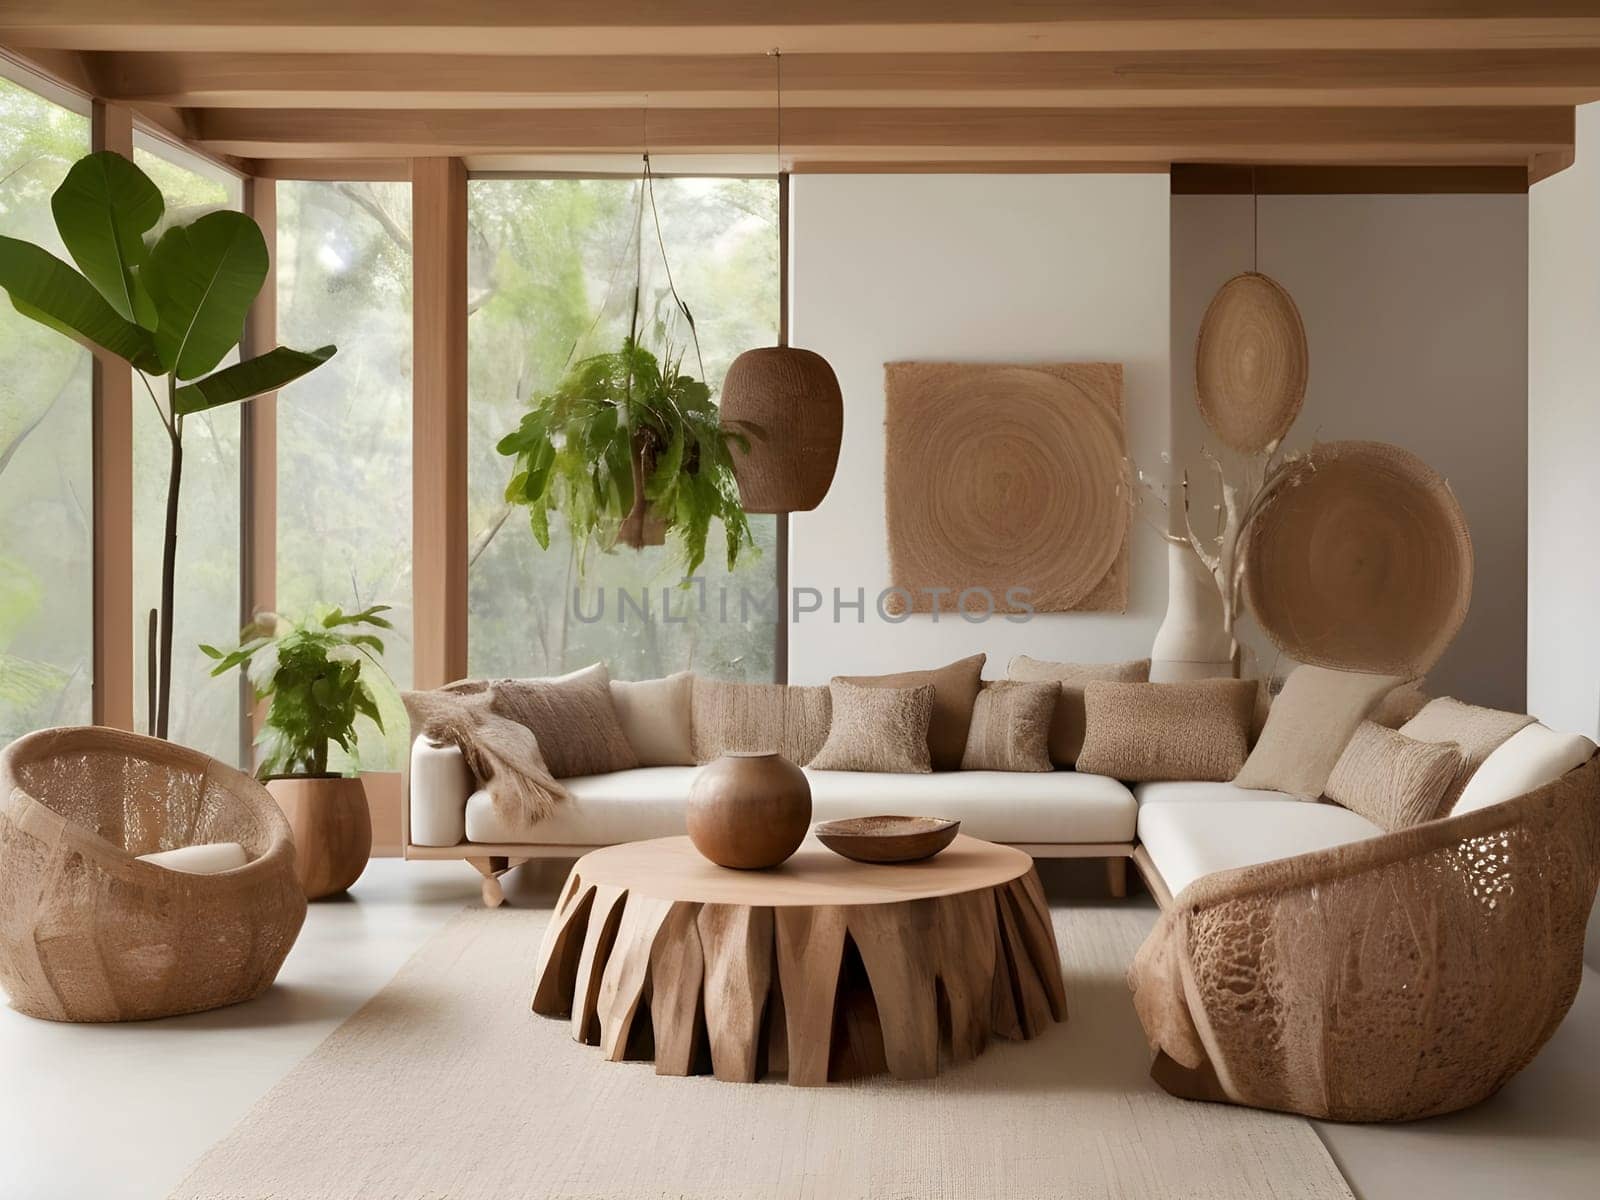 Photograph ecologists incorporating nature-inspired decor elements like natural fibers, wooden furniture, and eco-friendly textiles